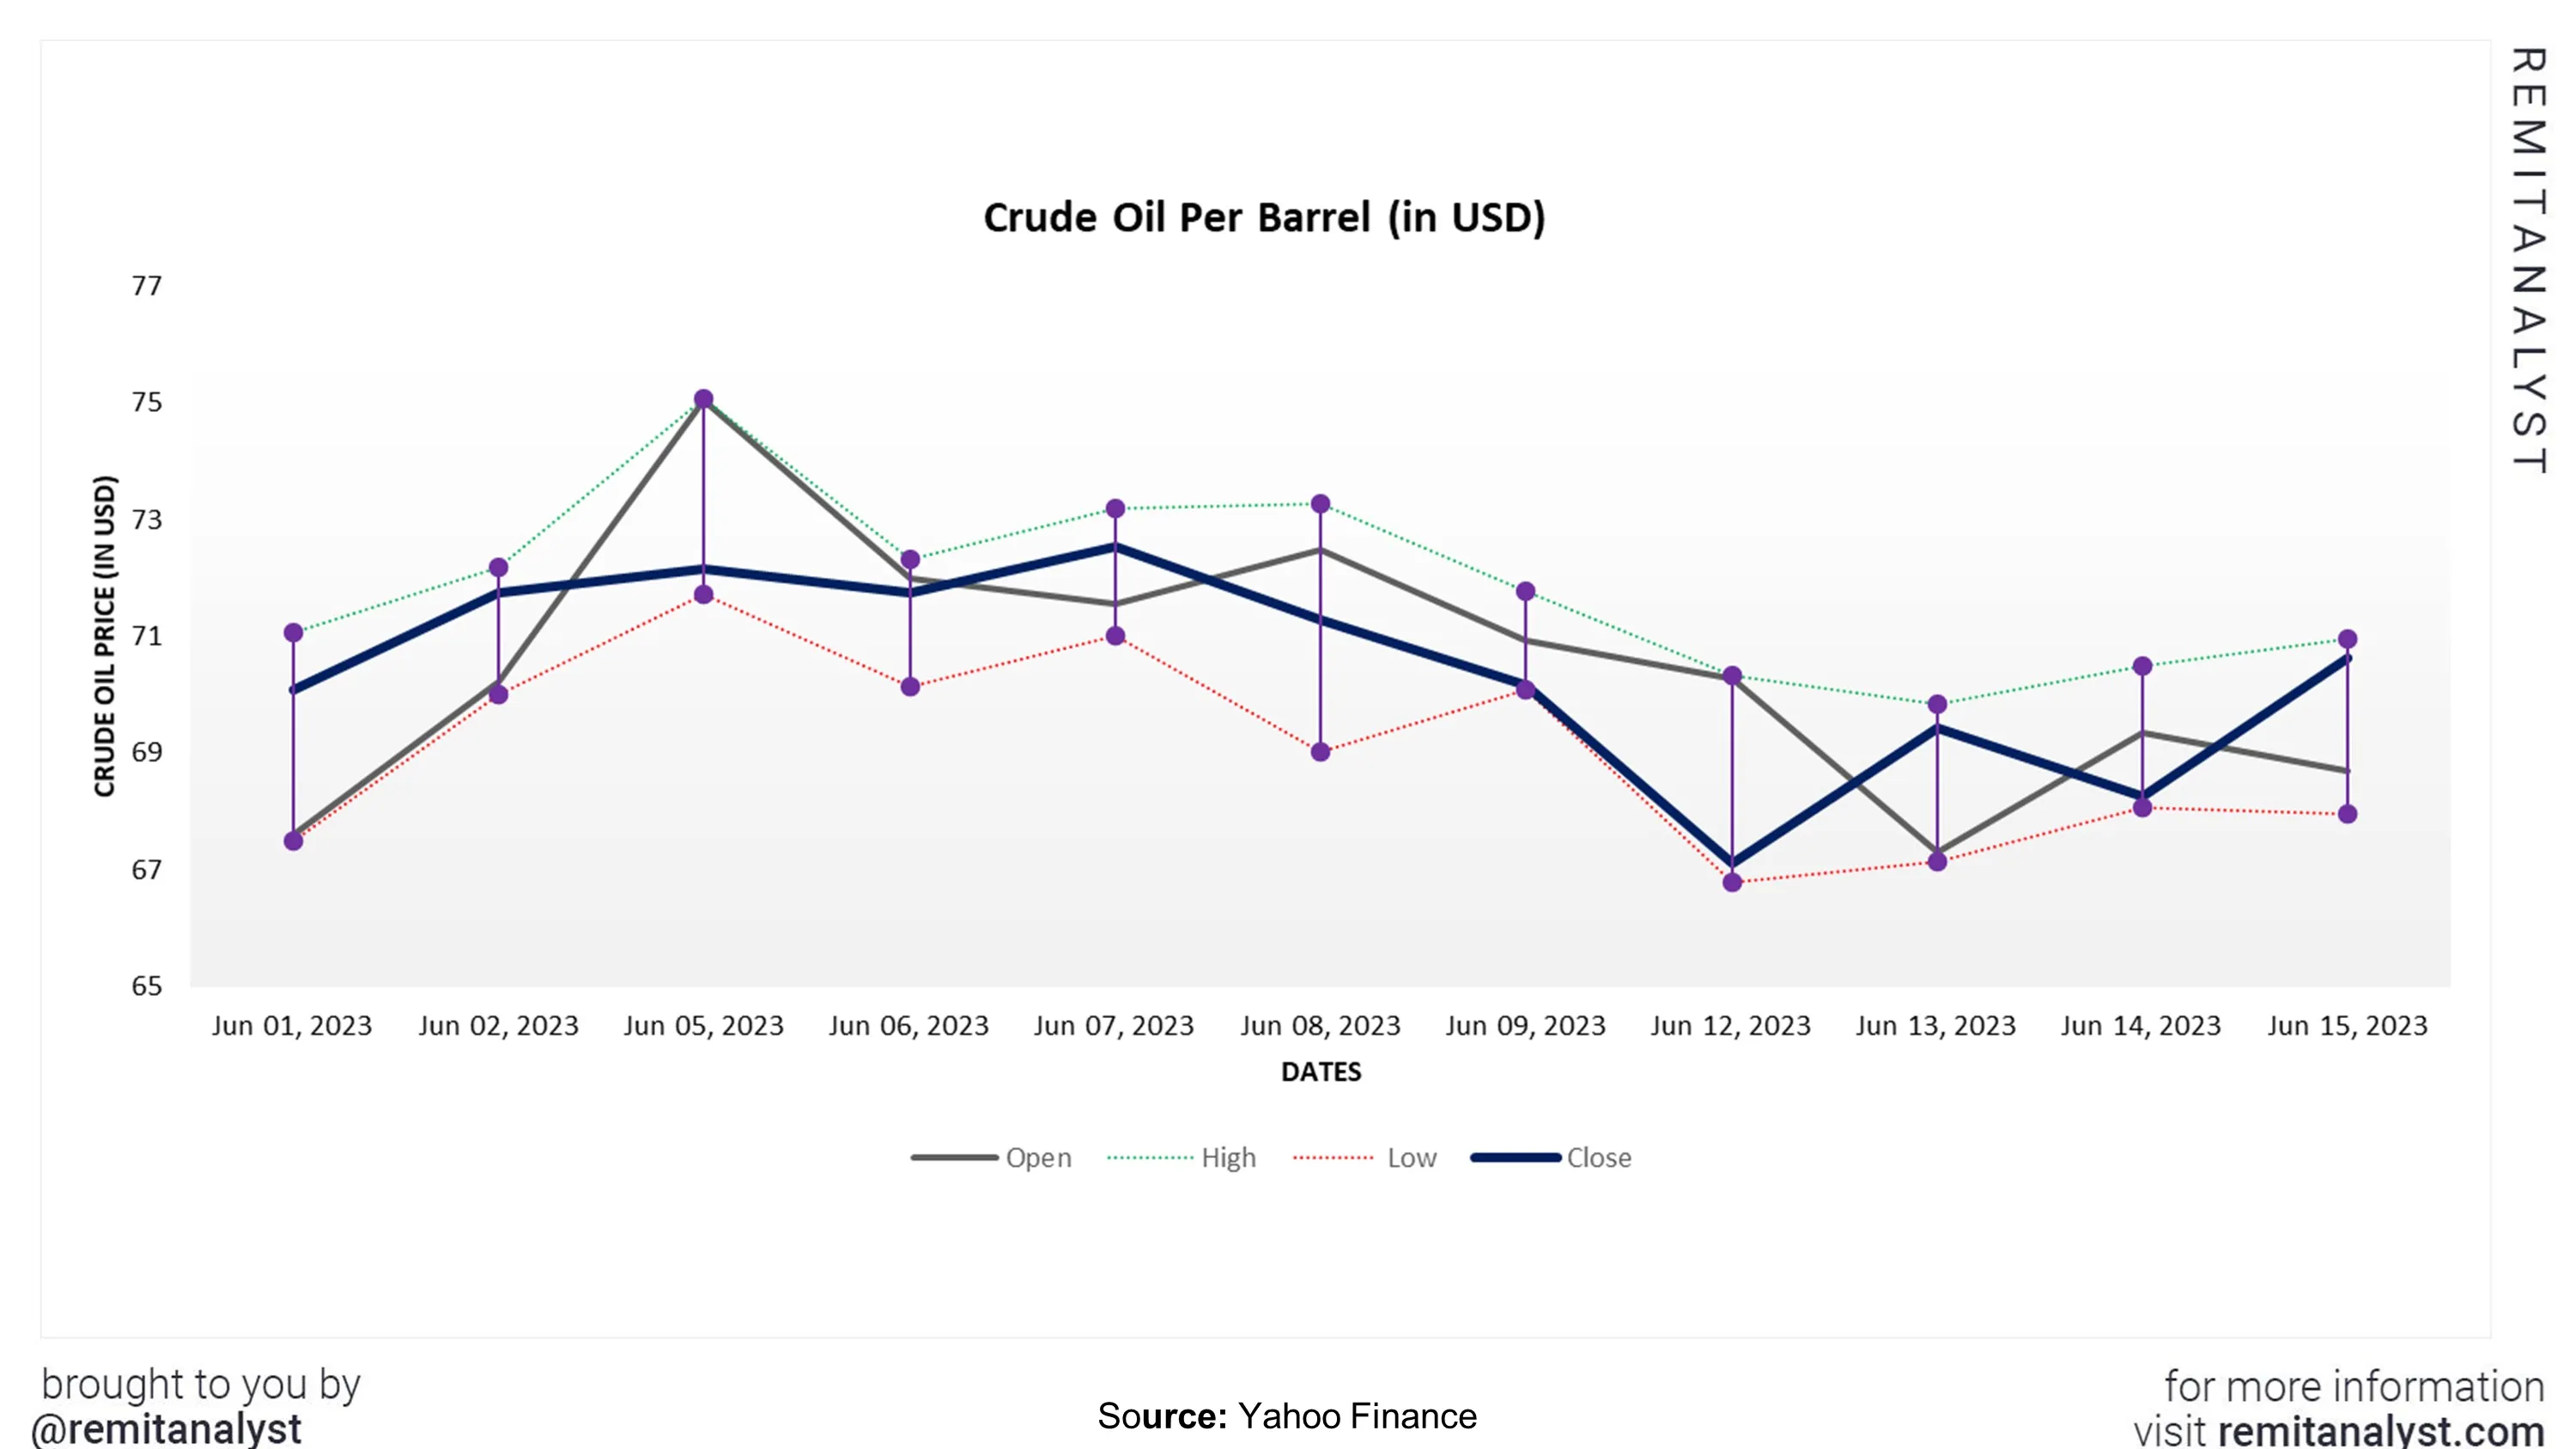 crude-oil-prices-from-1-june-2023-to-15-june-2023